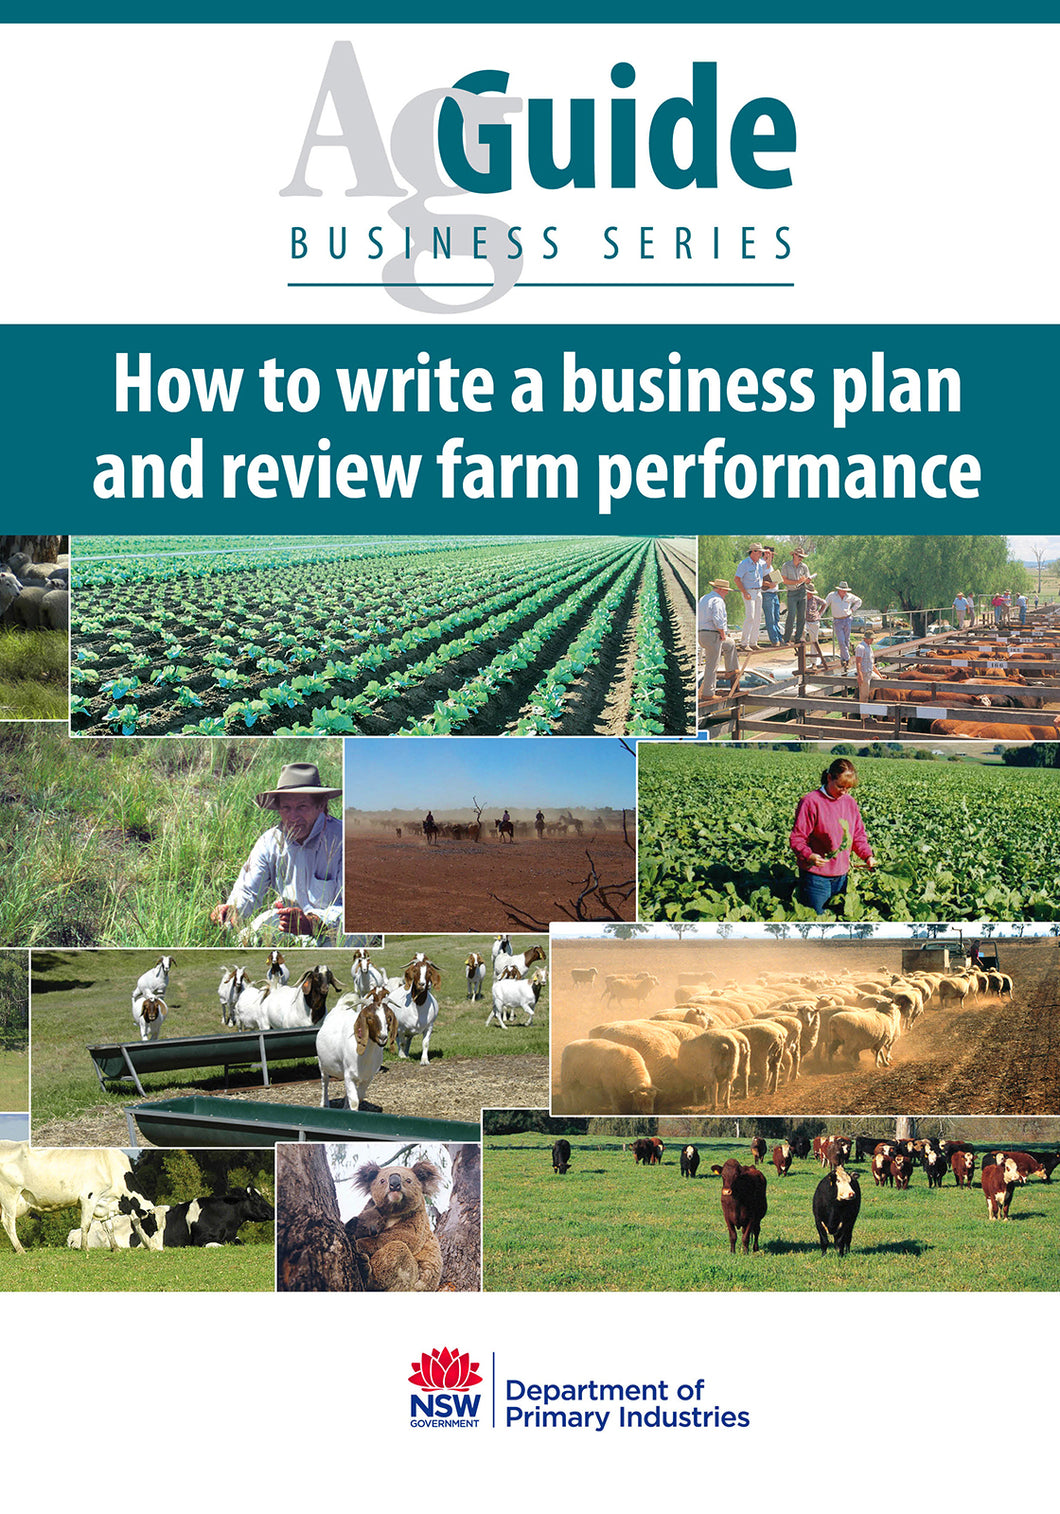 agricultural equipment rental business plan